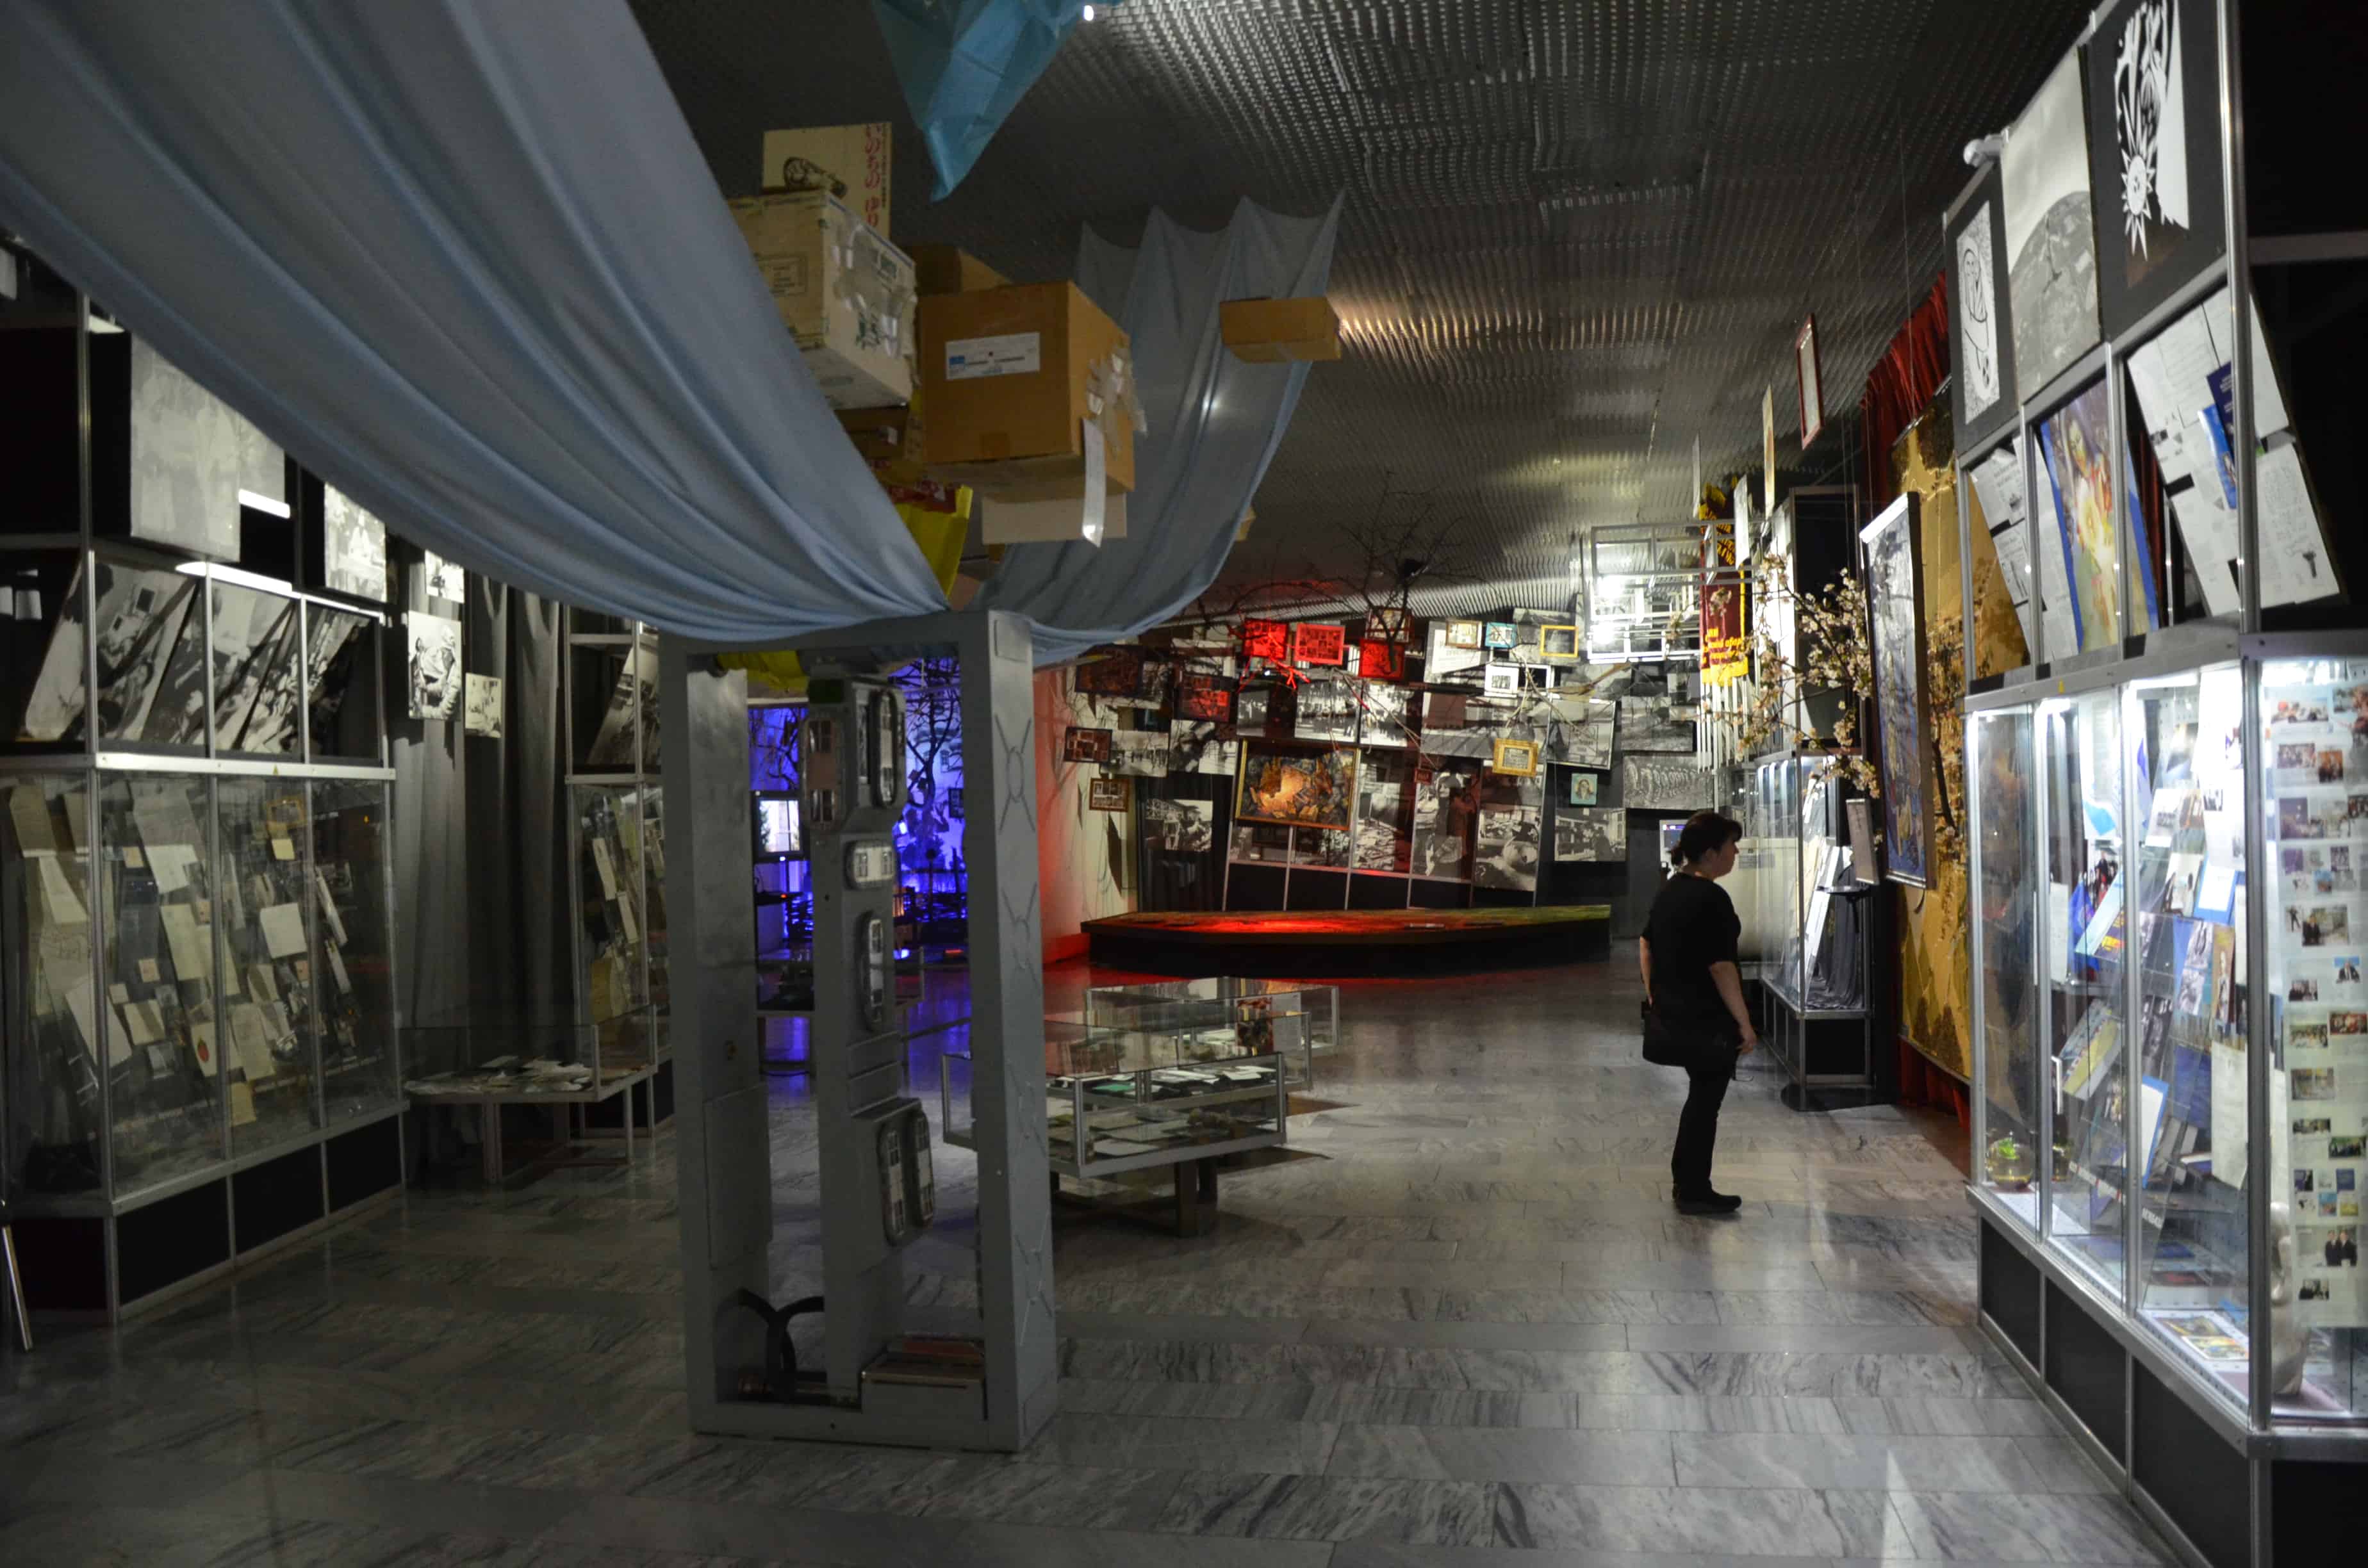 Exhibit on the history of the disaster at the Chernobyl Museum in Kyiv, Ukraine